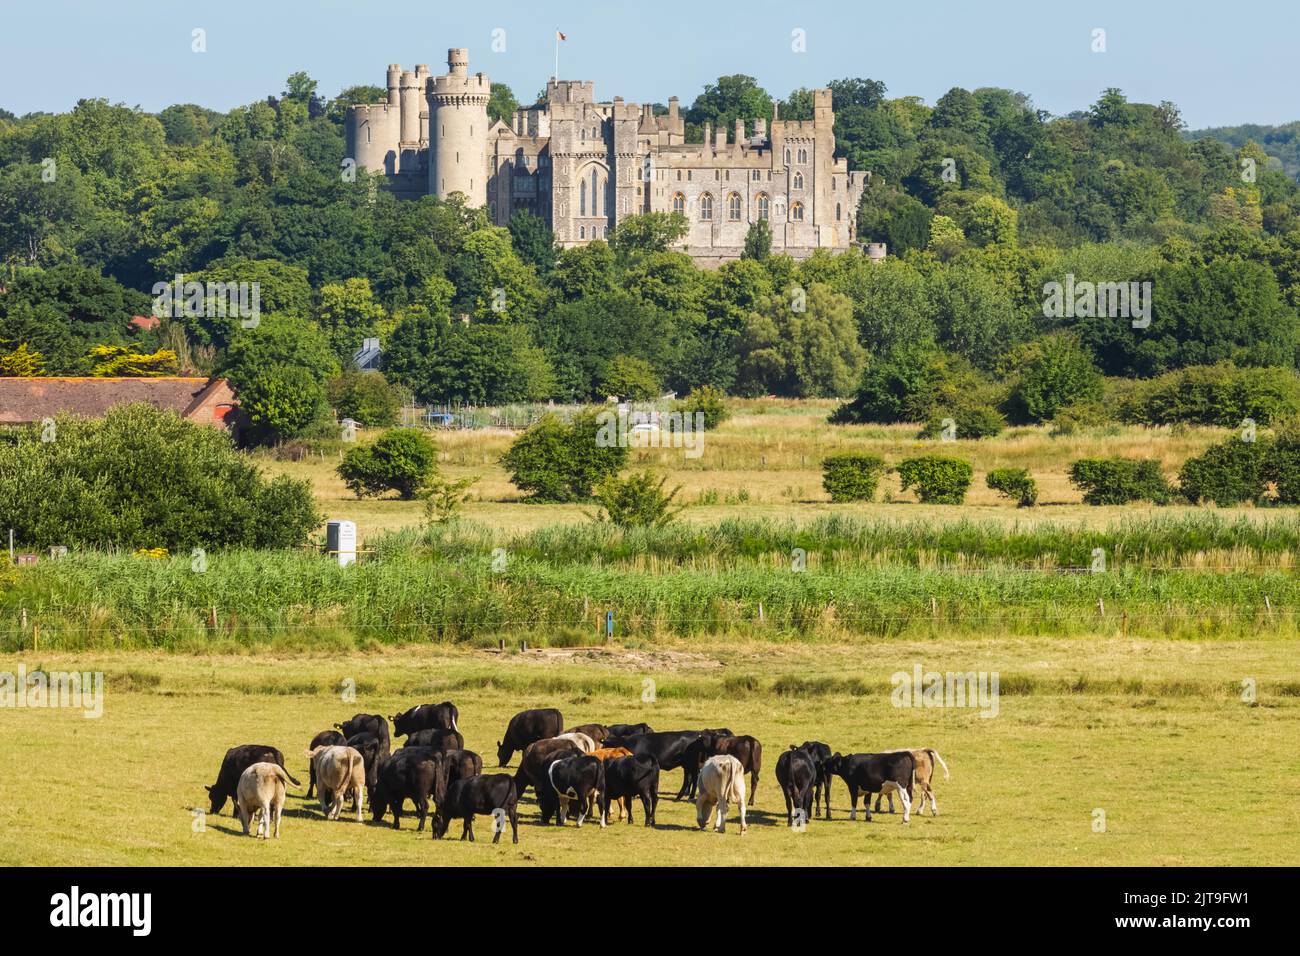 England, West Sussex, Arundel, Arundel Castle and Cows in Foreground Stock Photo